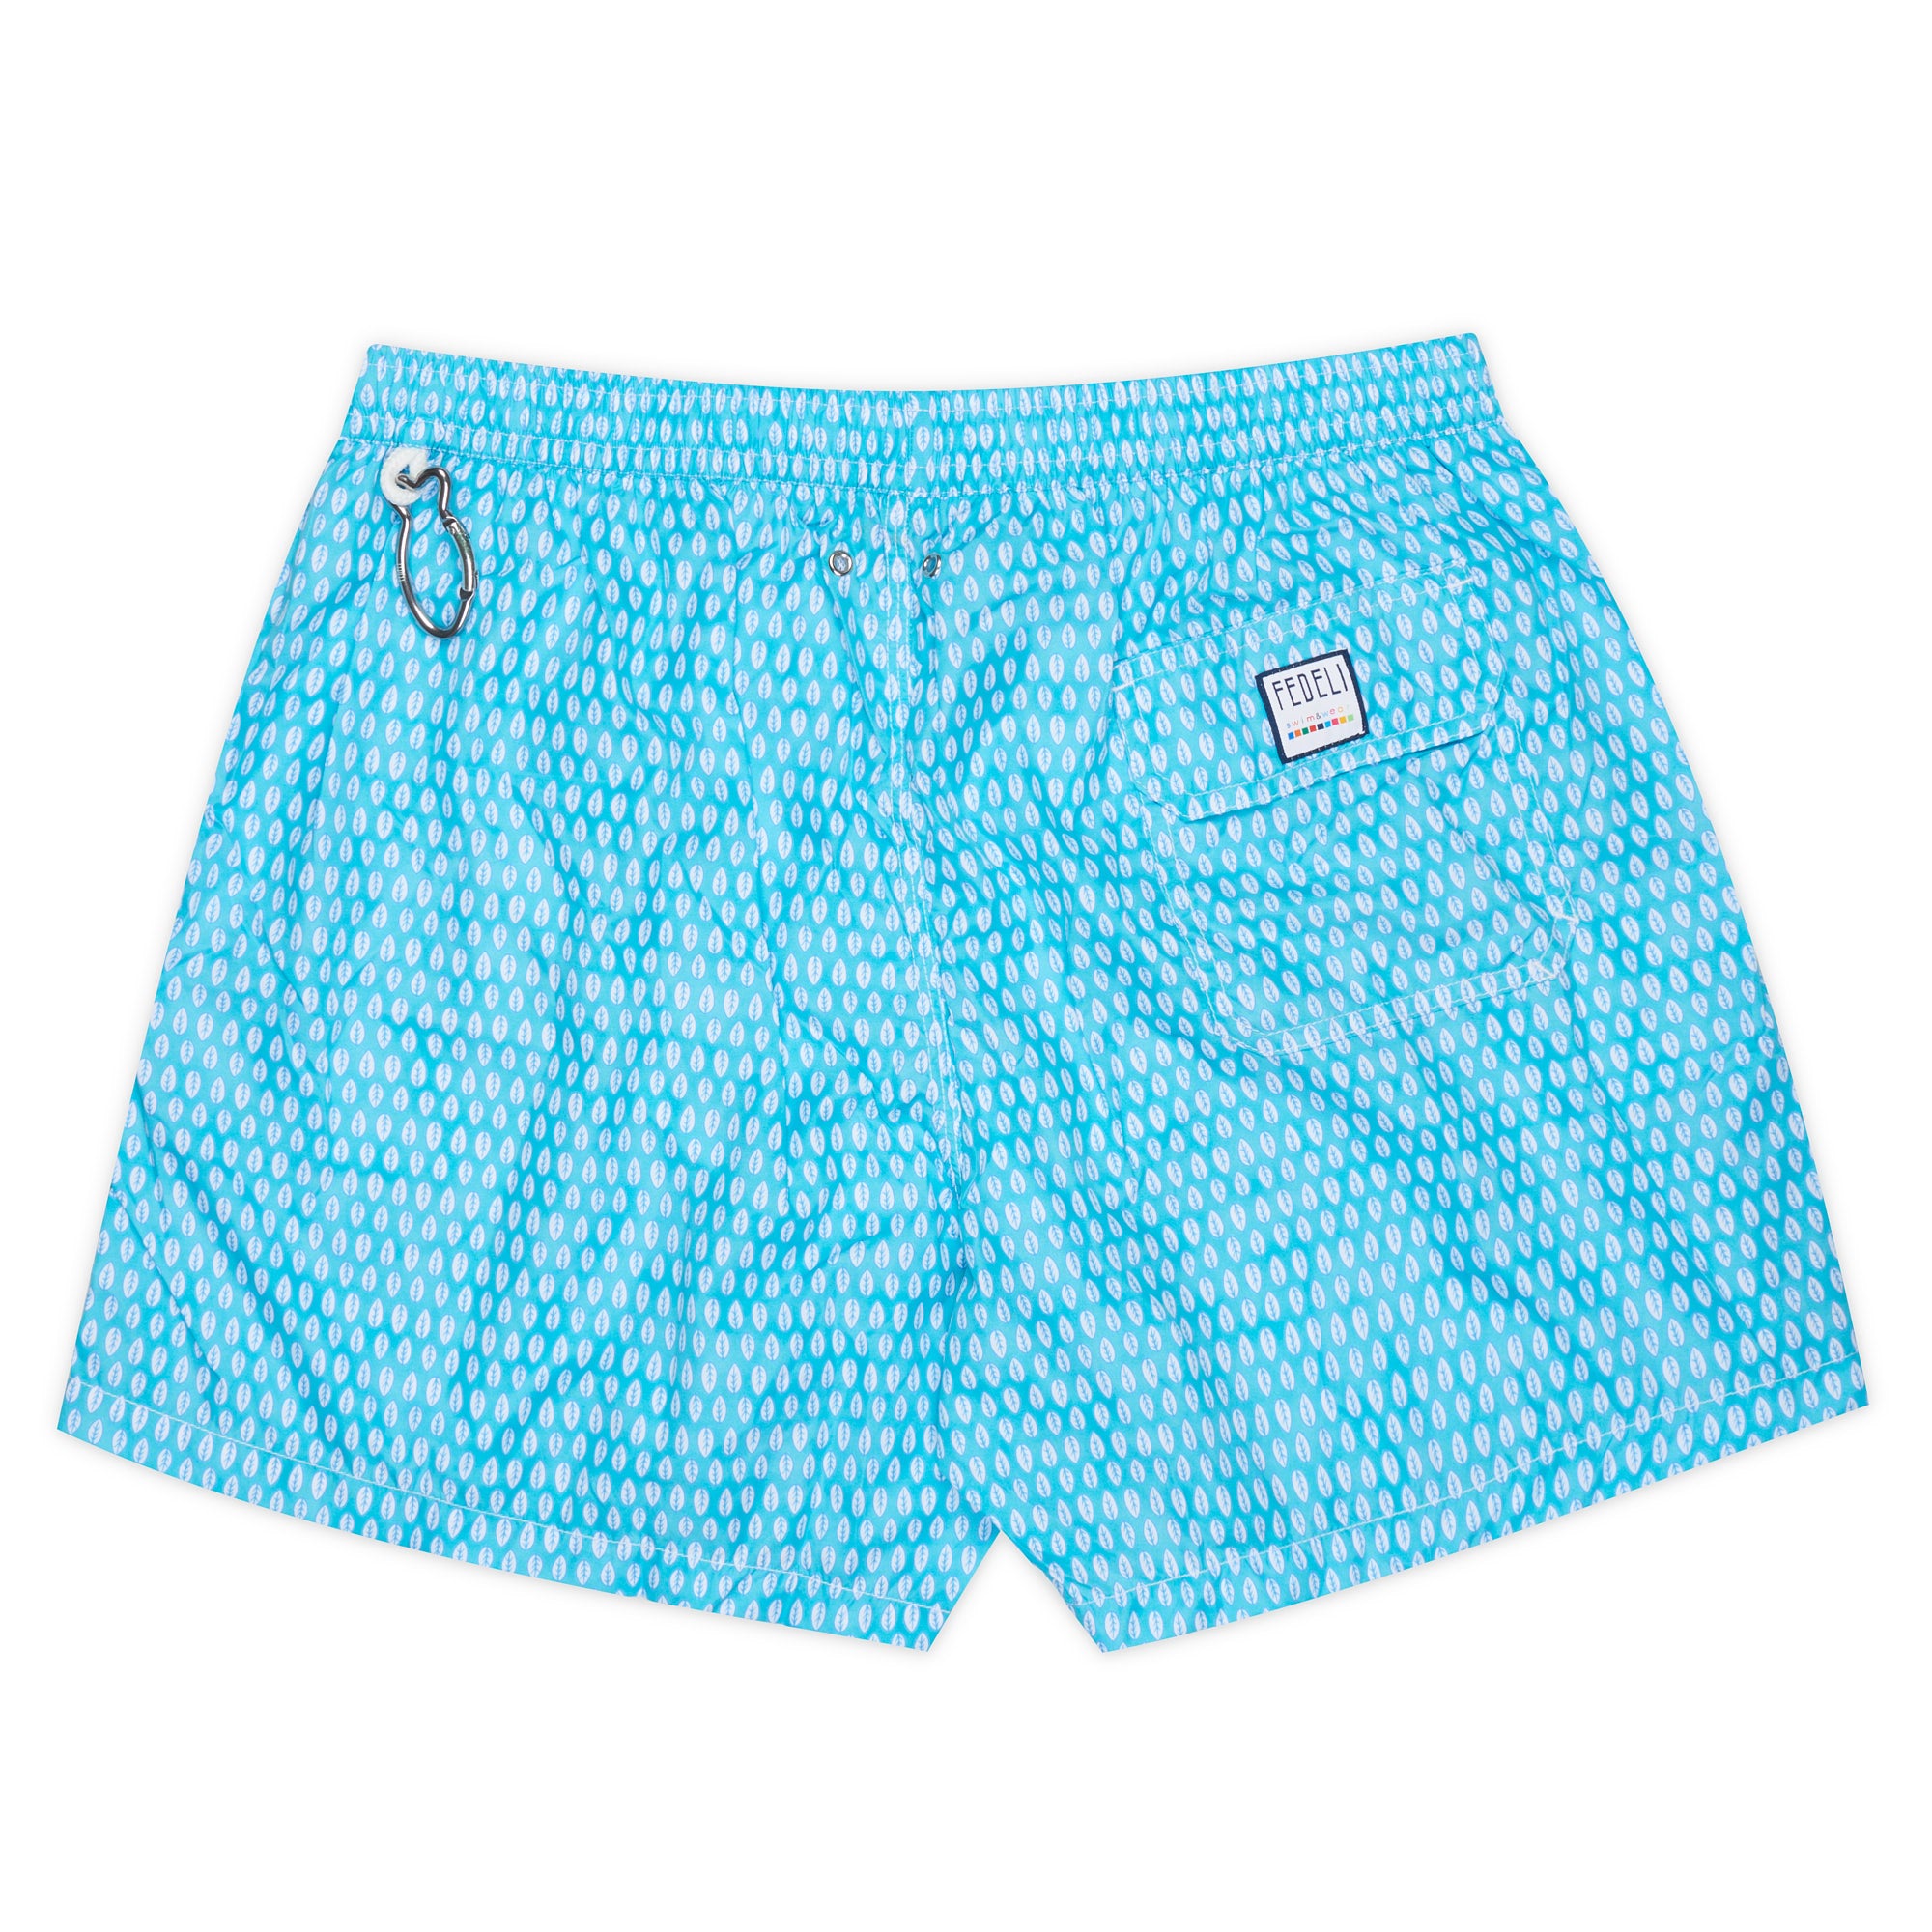 FEDELI Turquoise Leaf Print Madeira Airstop Swim Shorts Trunks NEW 2XL